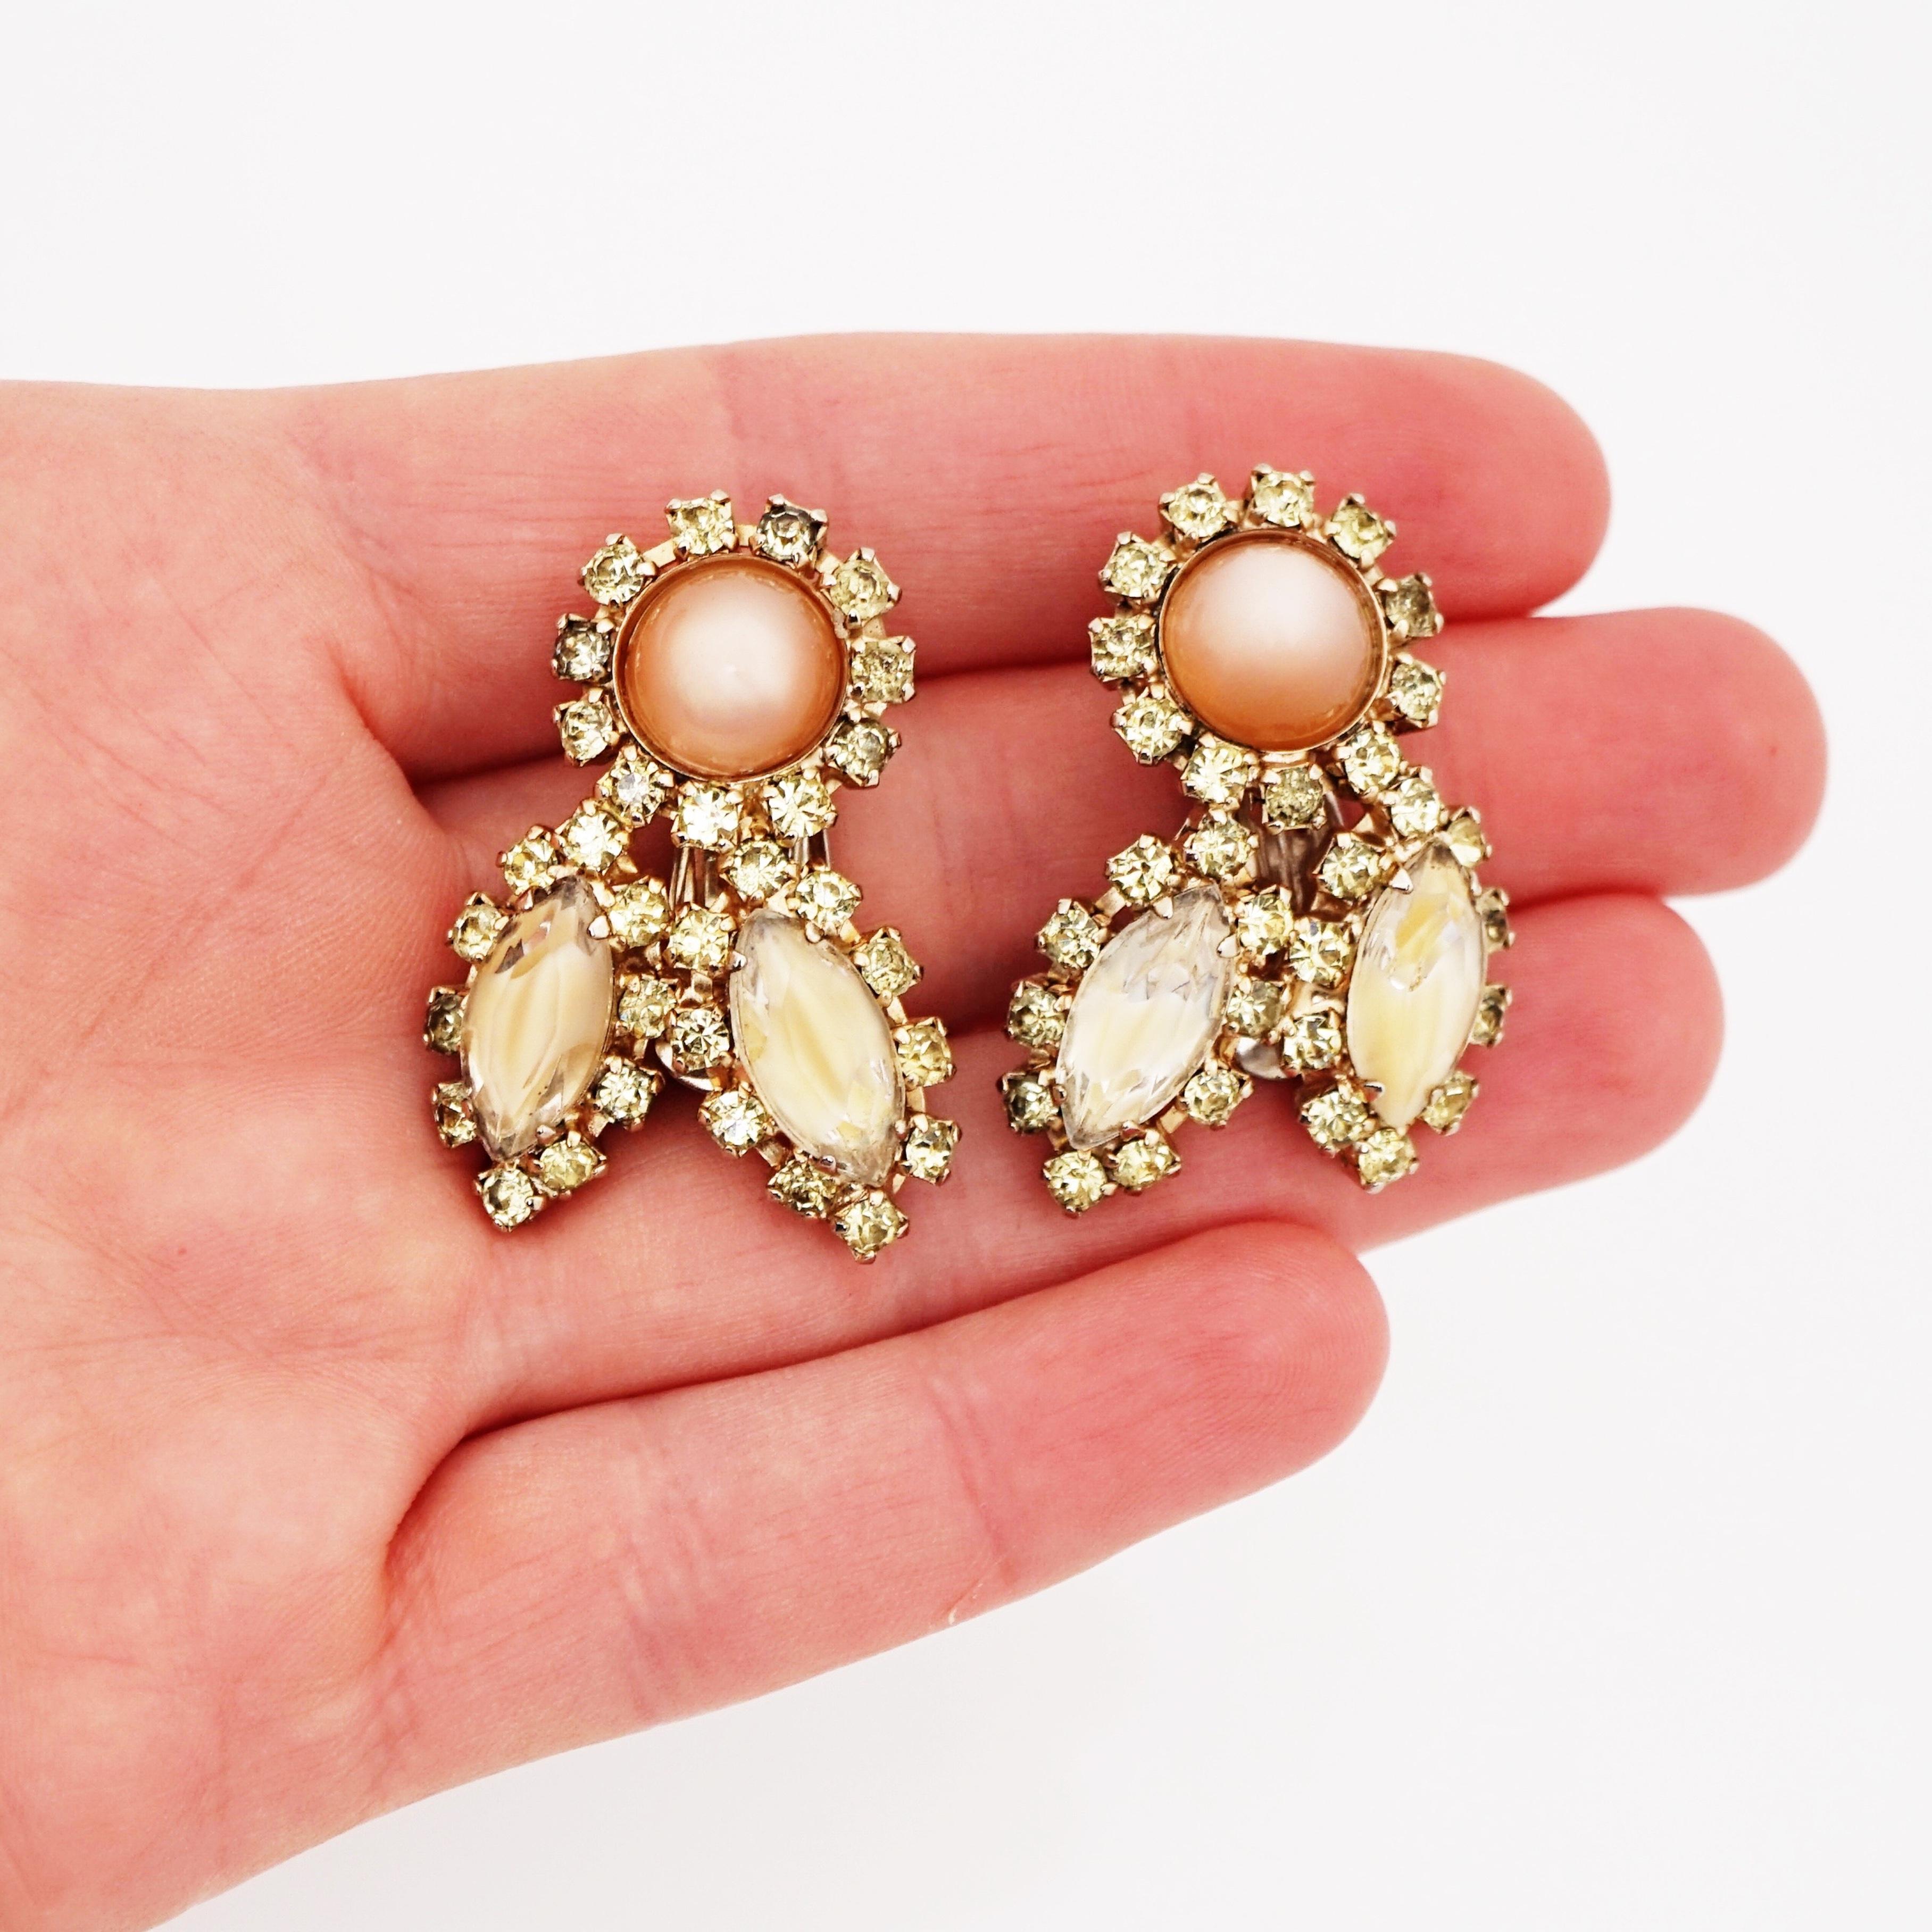 Juliana Style Peach Moonglow Thermoset and Champagne Rhinestone Climber Earrings In Good Condition For Sale In McKinney, TX